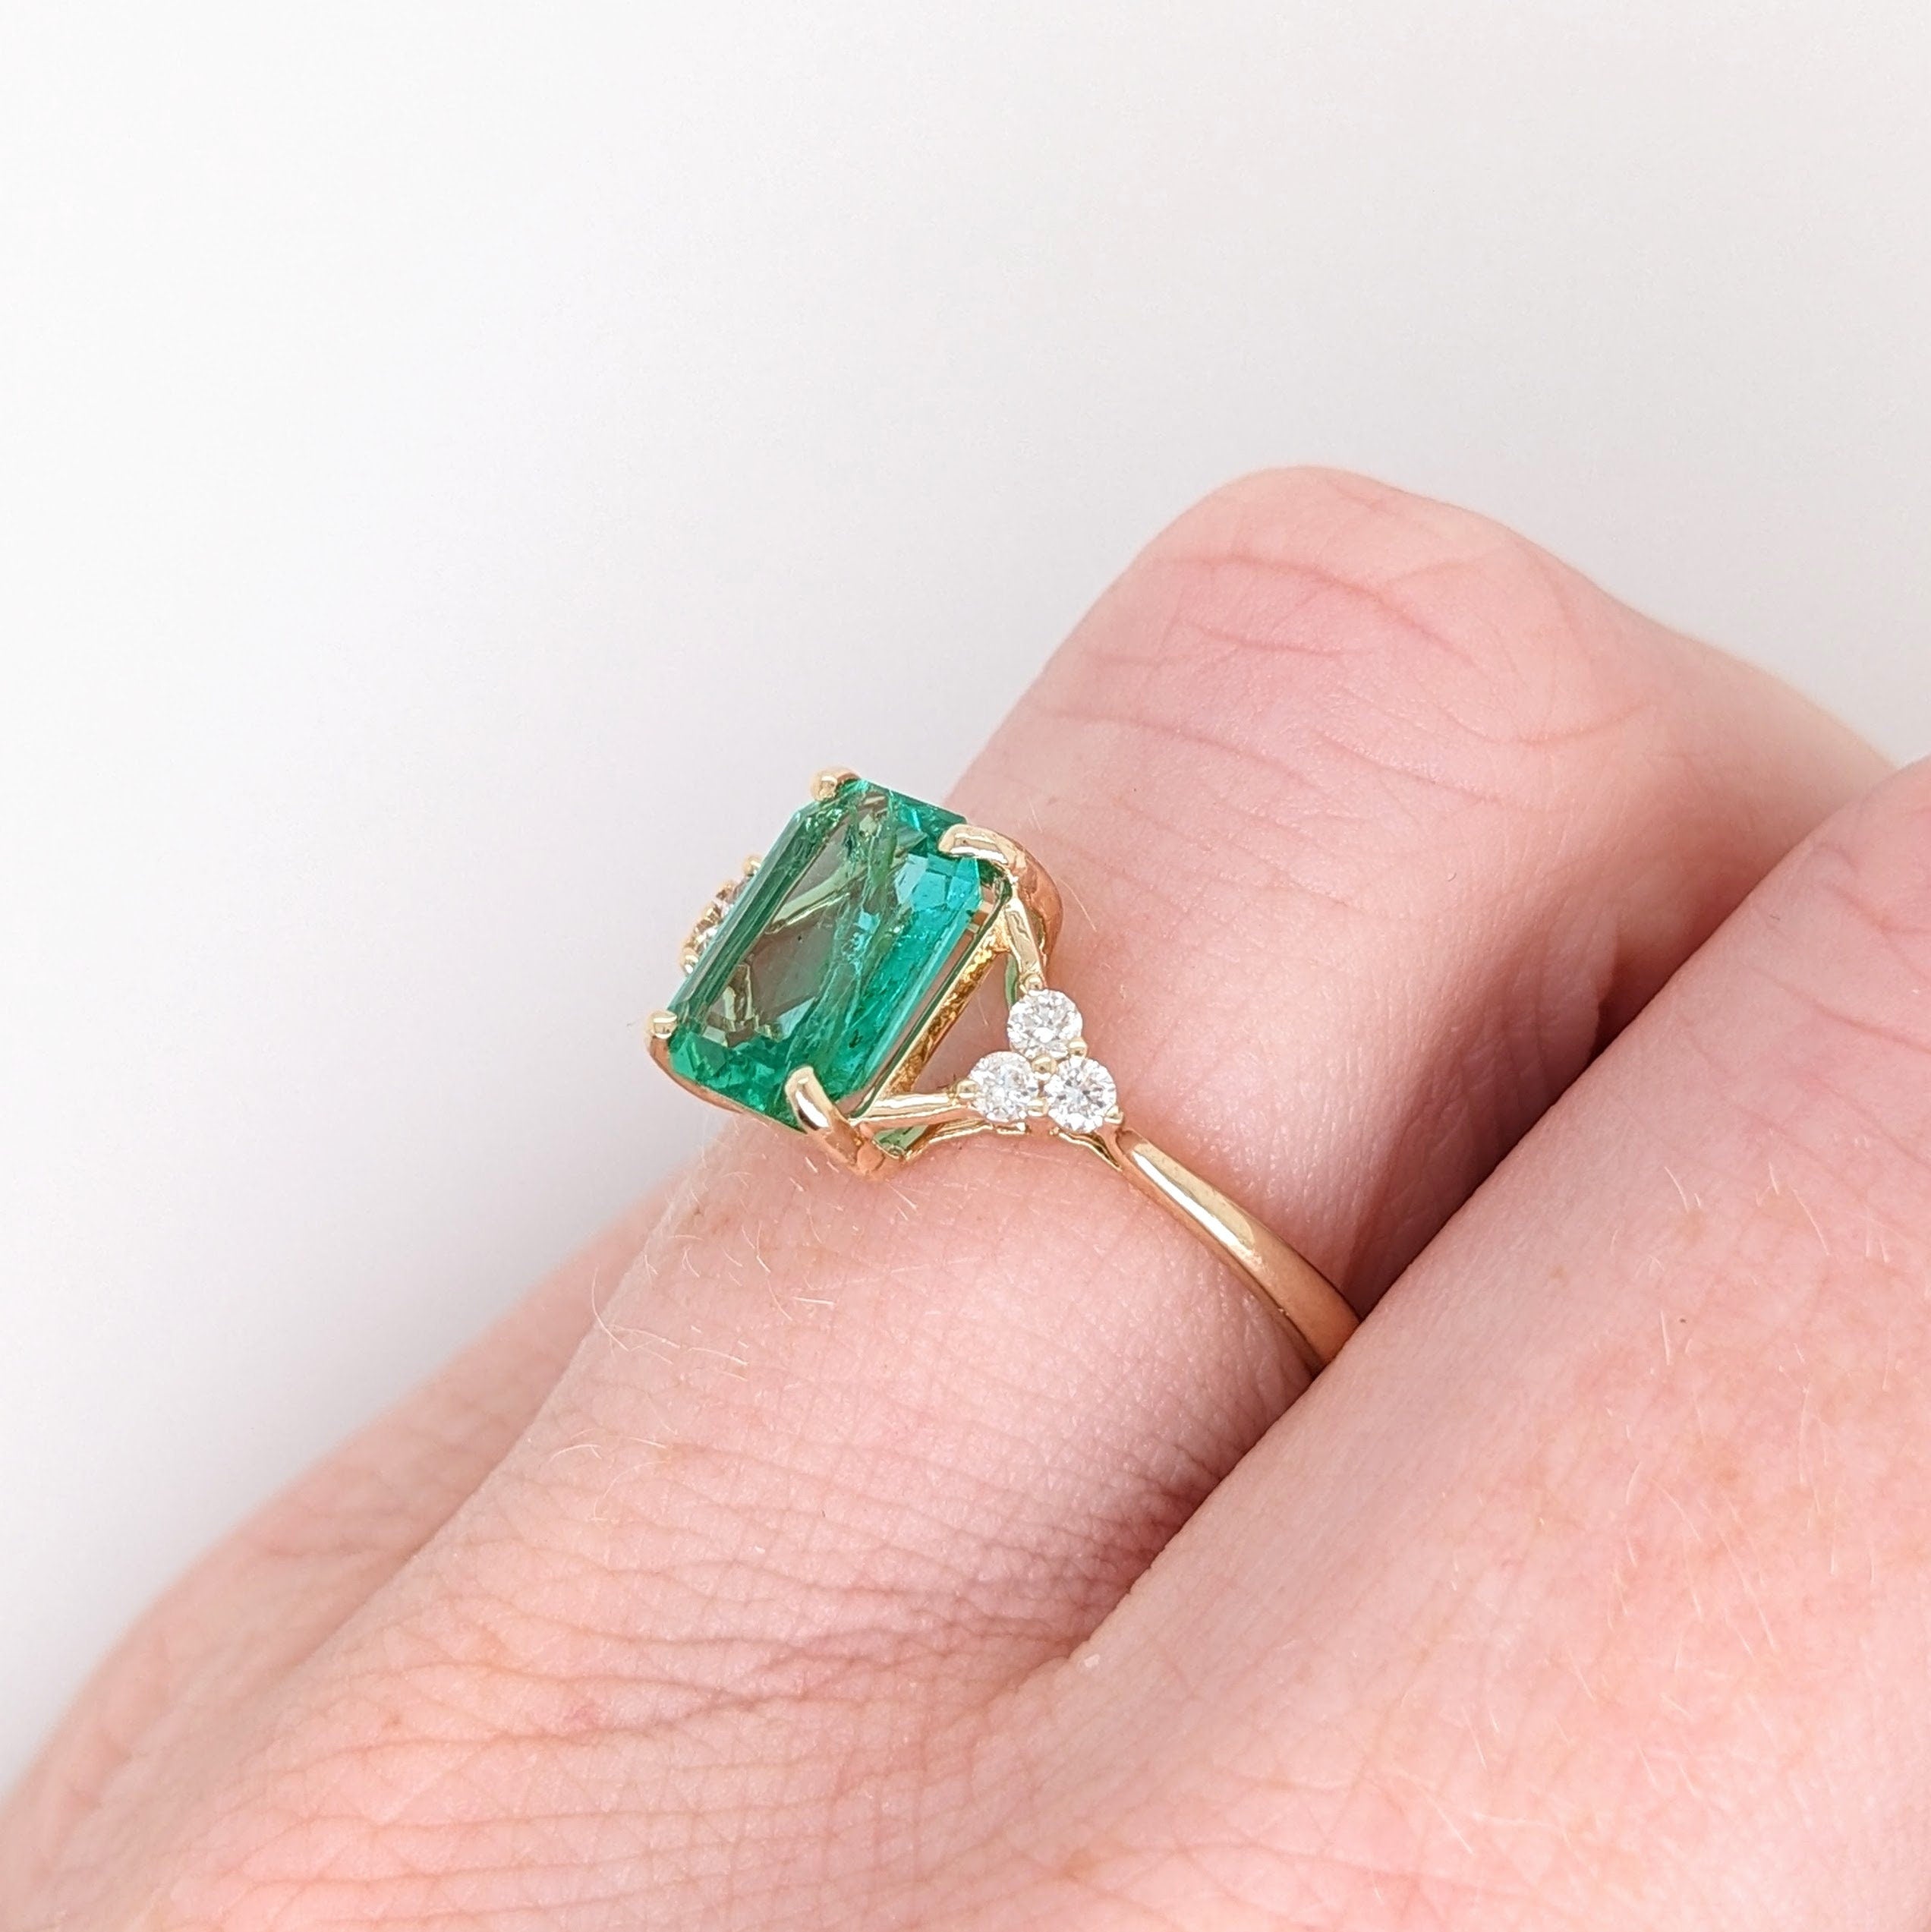 Classic Ethiopian Emerald Ring in Solid 14k Yellow Gold with Natural Diamond Accents | Emerald cut 9x7mm | May Birthstone | Dainty Ring